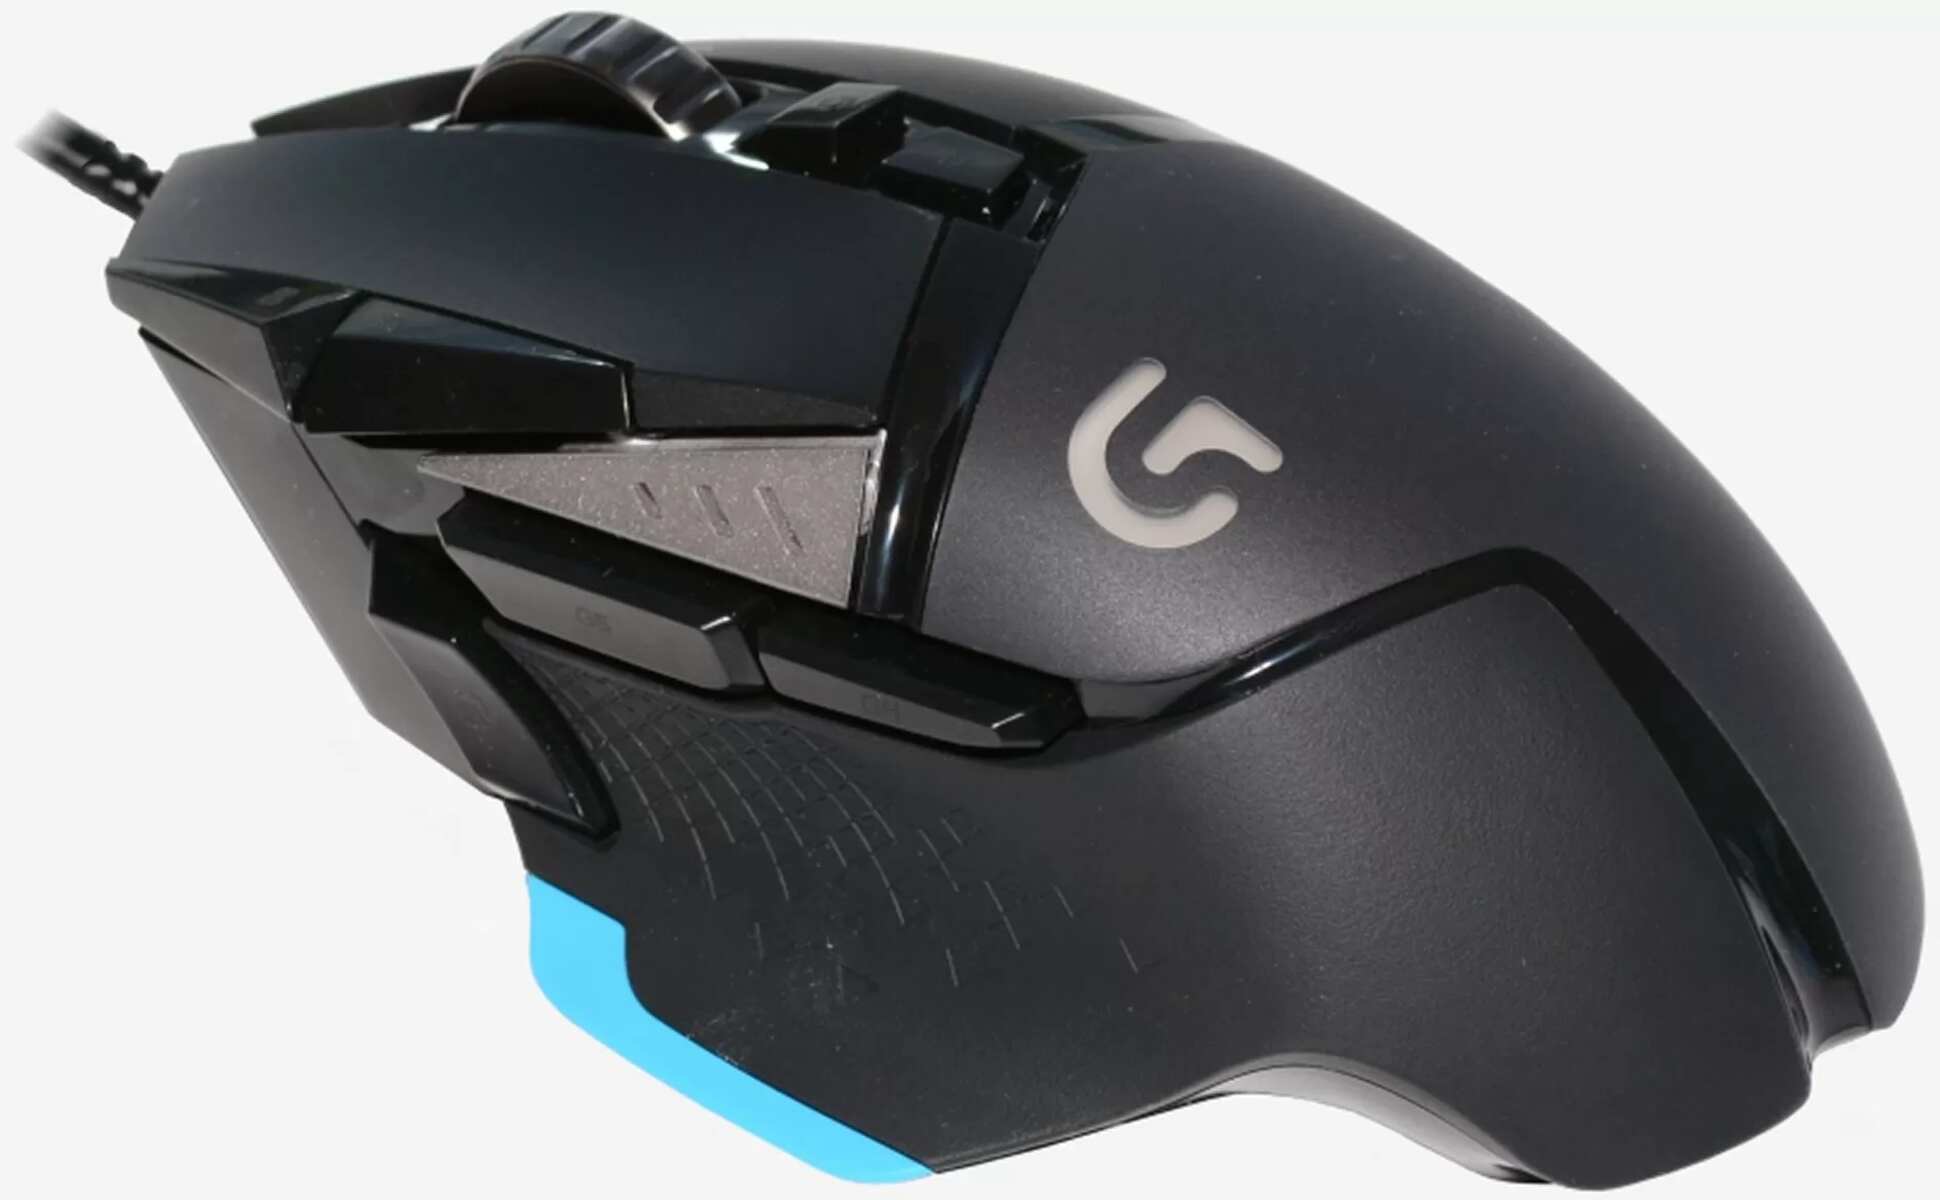 How To Setup G502 Proteus Core Tunable Gaming Mouse